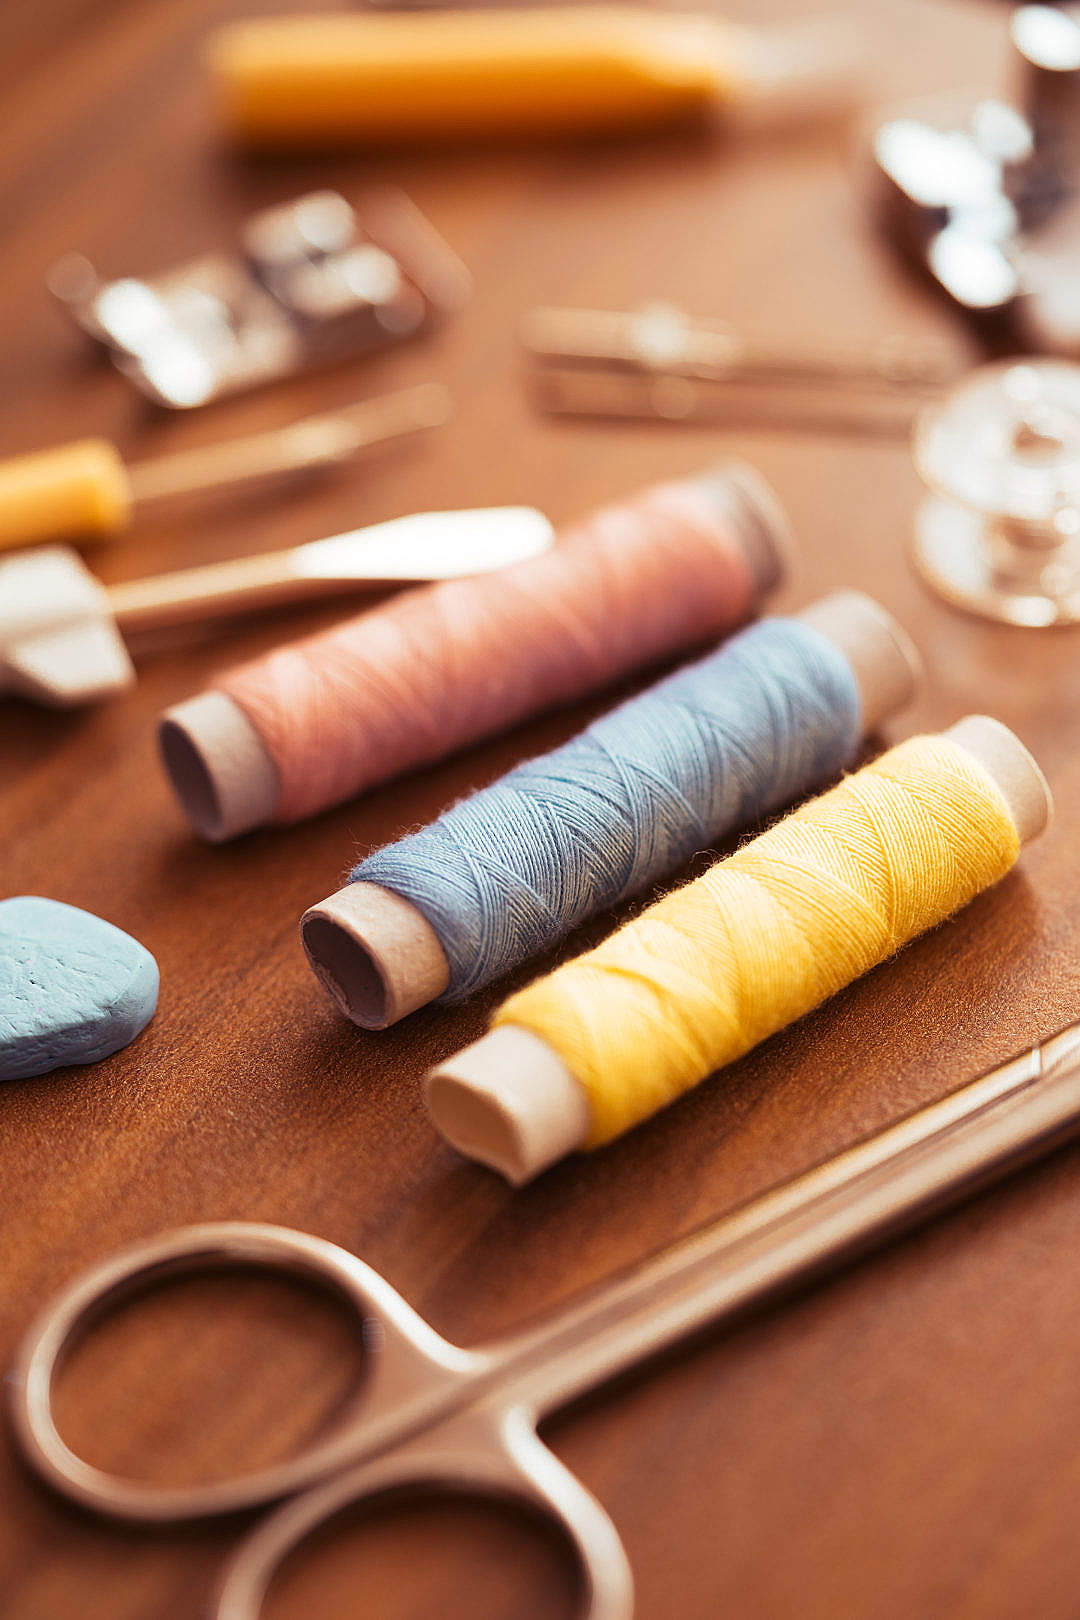 Download Sewing Kit on The Wooden Table FREE Stock Photo